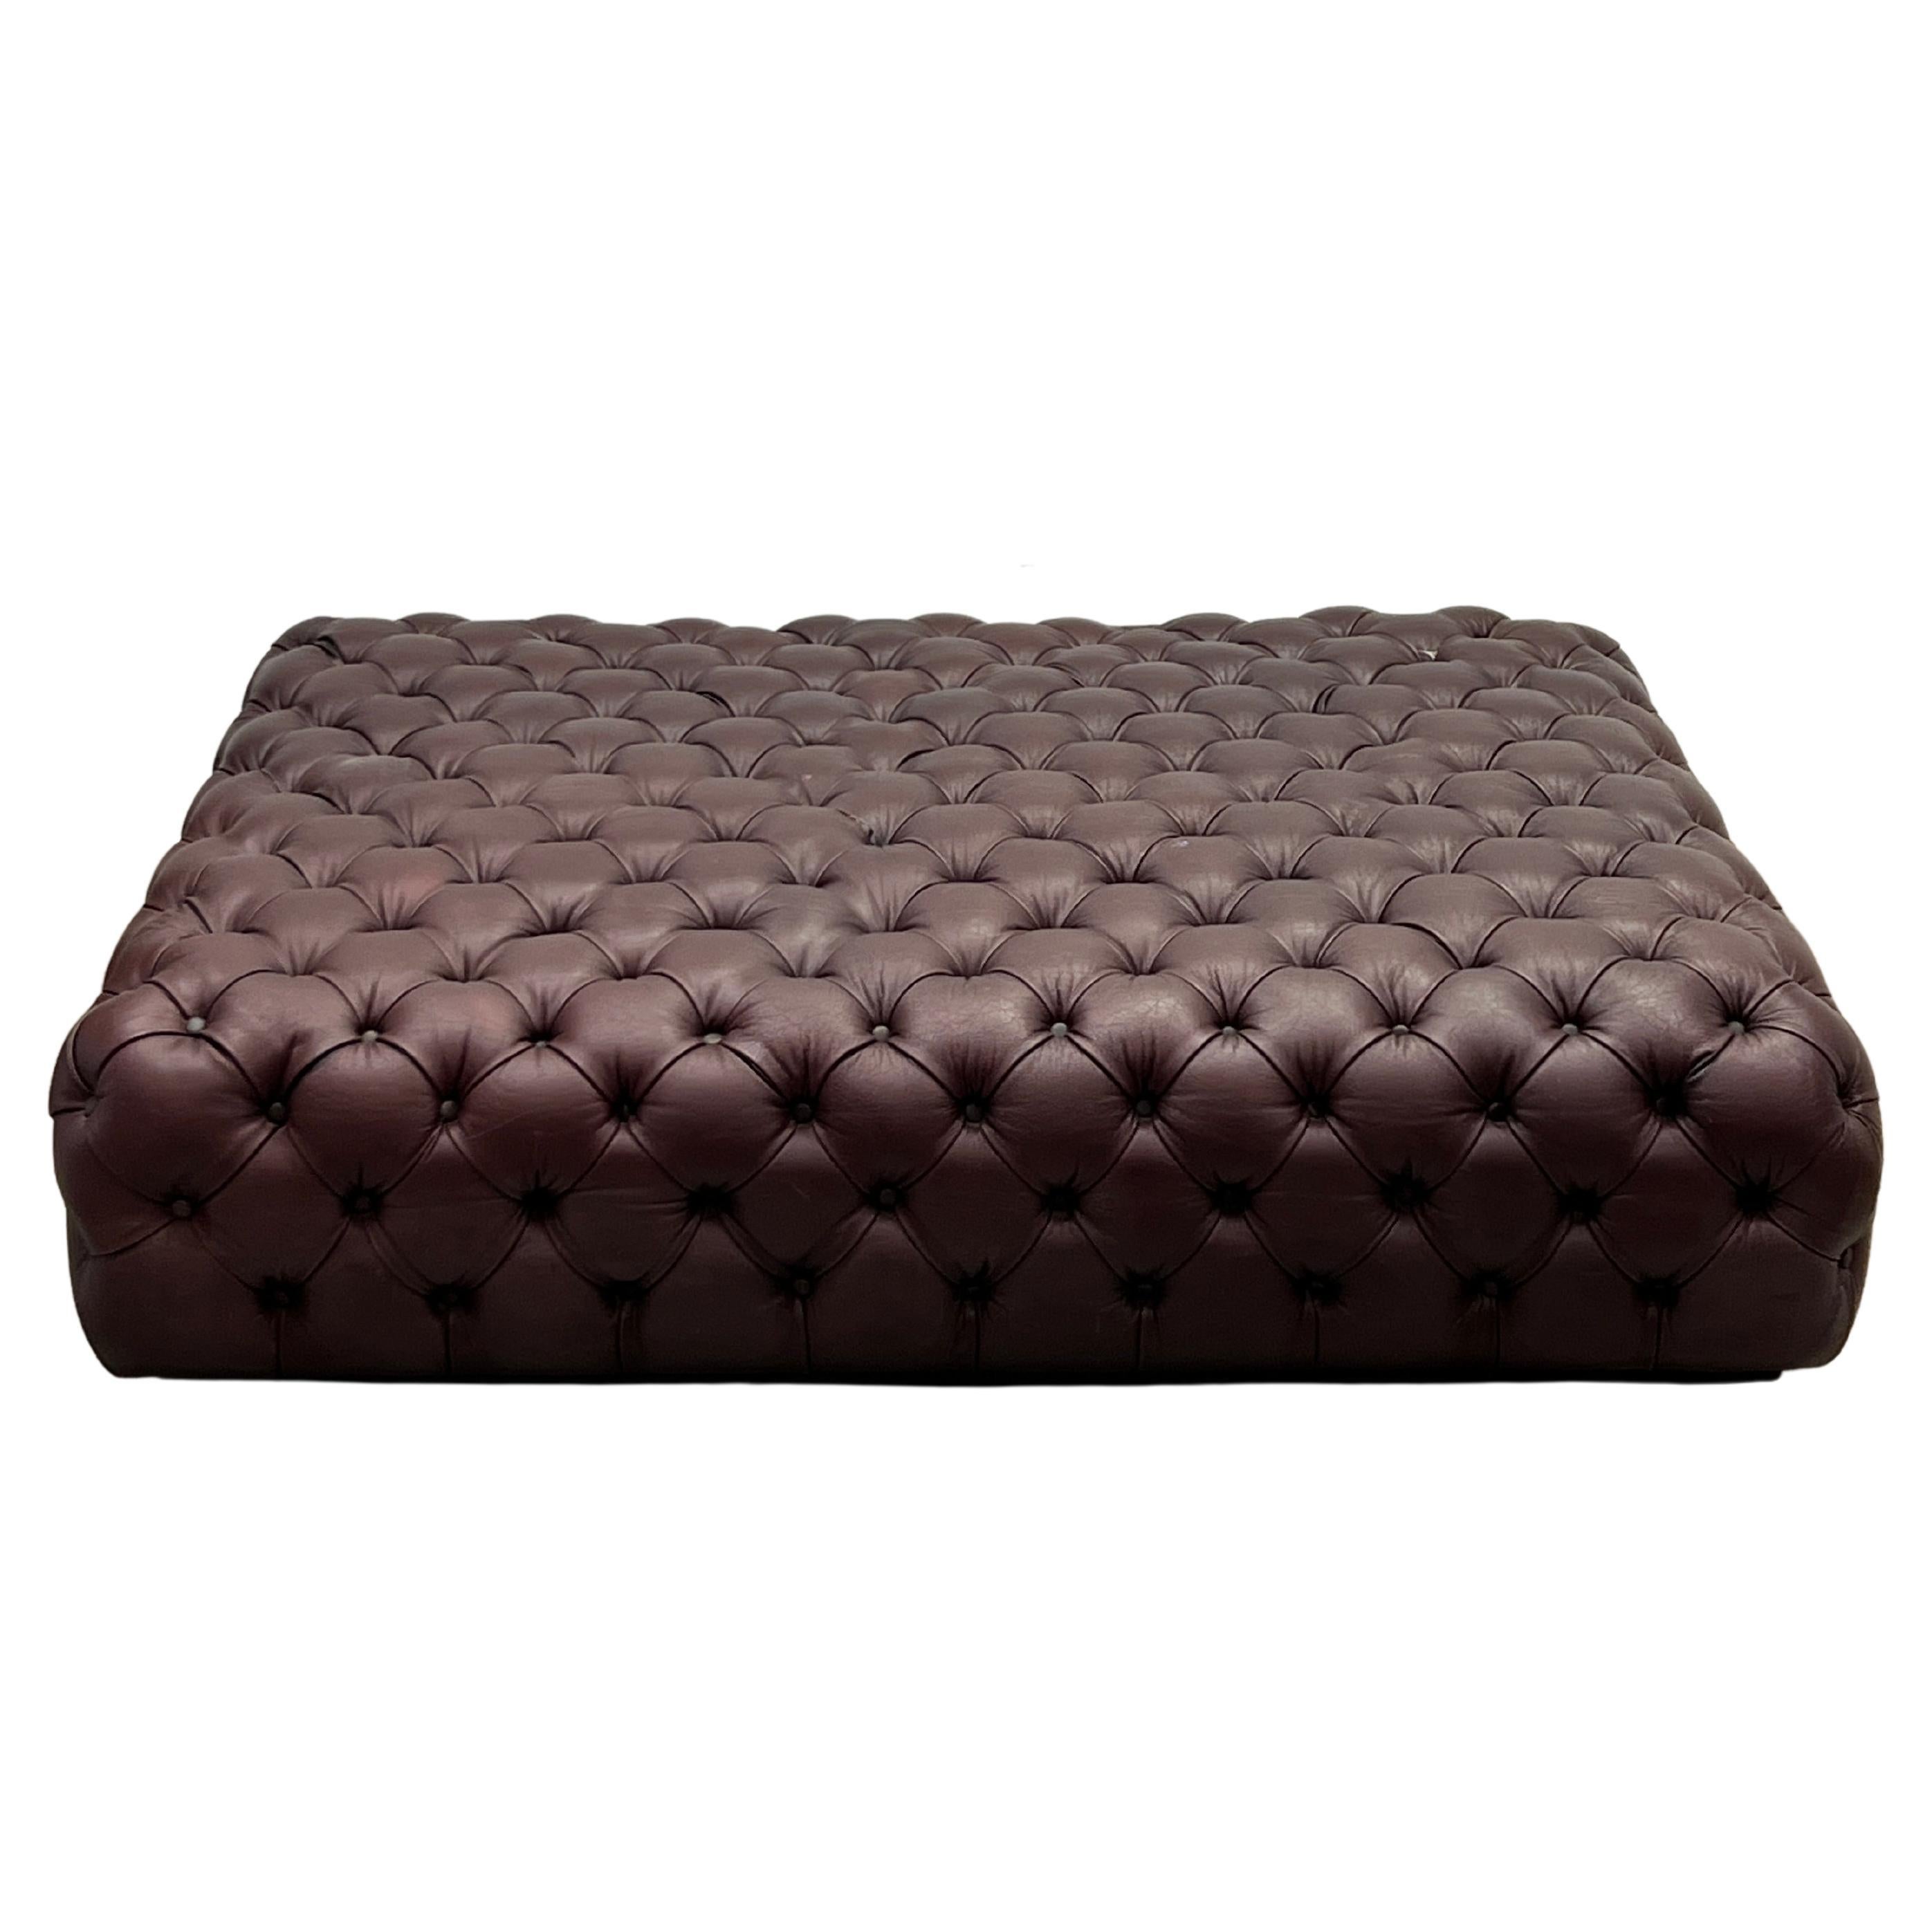 Oversized Low-Rise Leather Tufted Chesterfield Ottoman